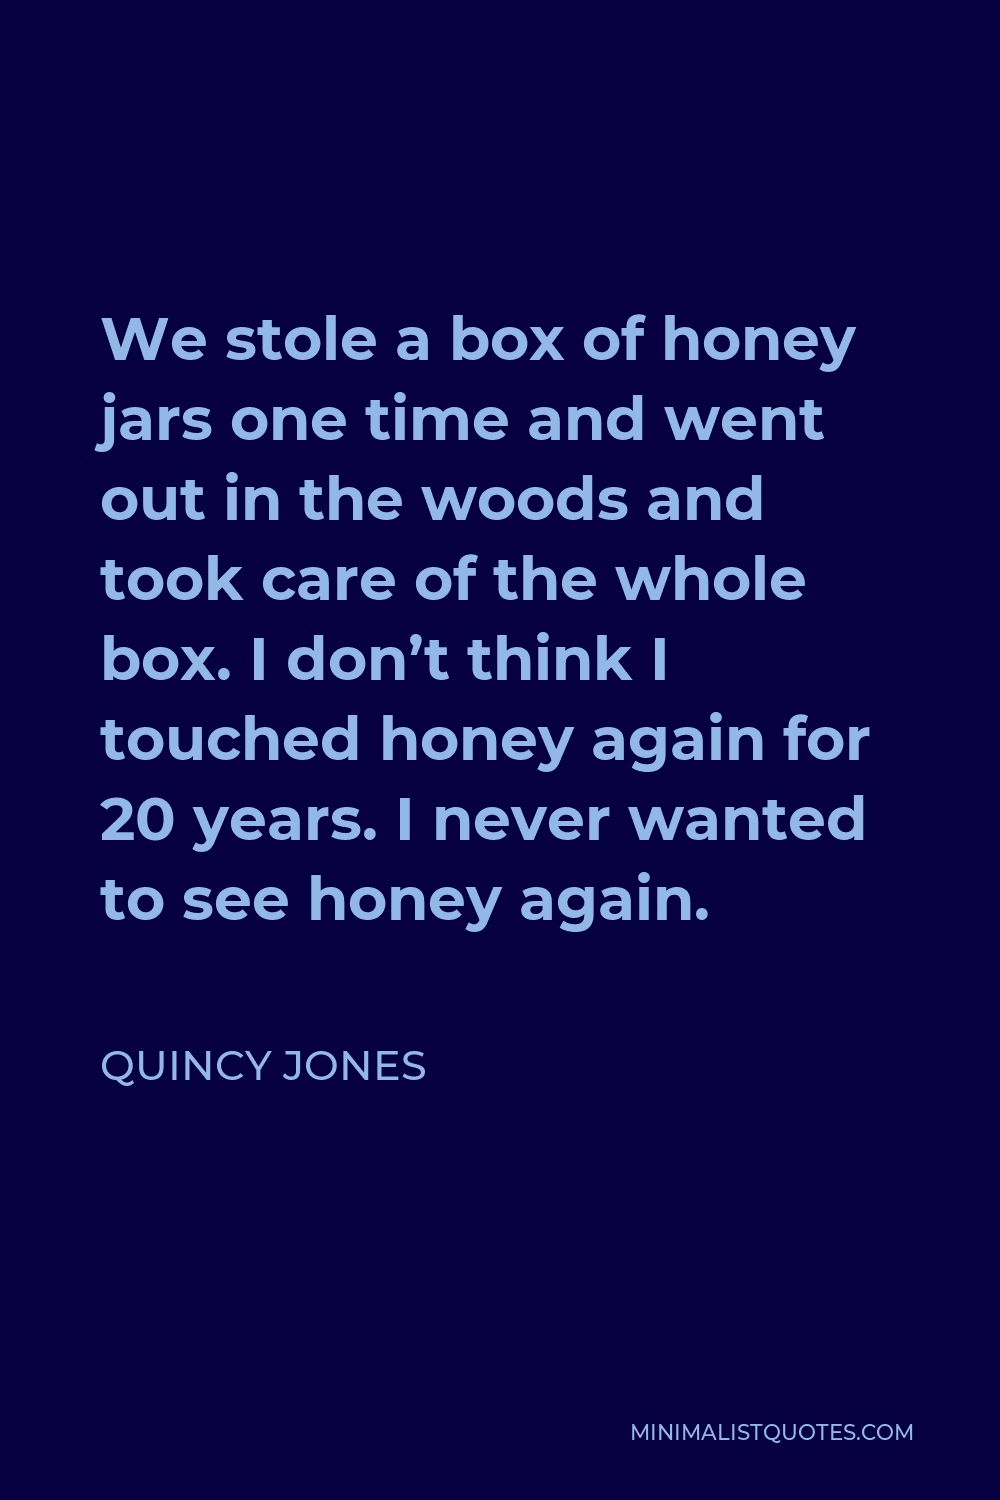 Quincy Jones Quote - We stole a box of honey jars one time and went out in the woods and took care of the whole box. I don’t think I touched honey again for 20 years. I never wanted to see honey again.